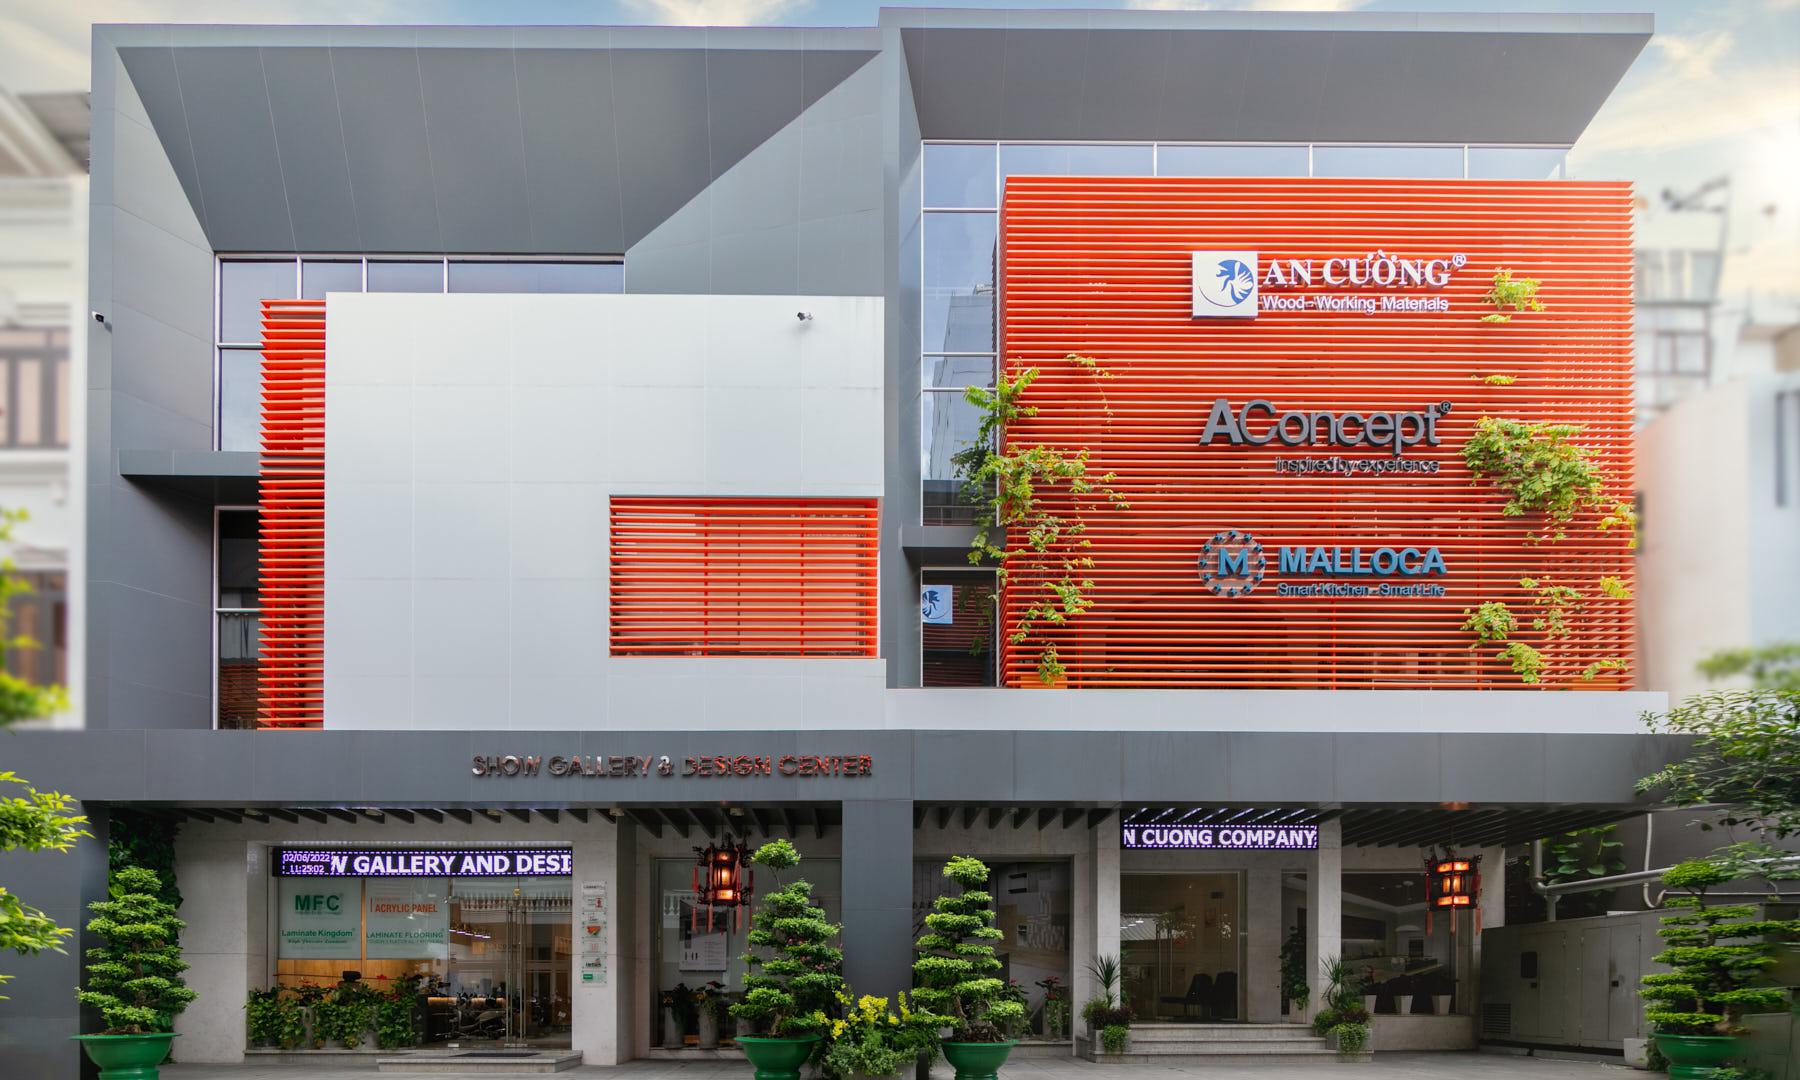 AN CUONG SHOW GALLERY AND DESIGN CENTER